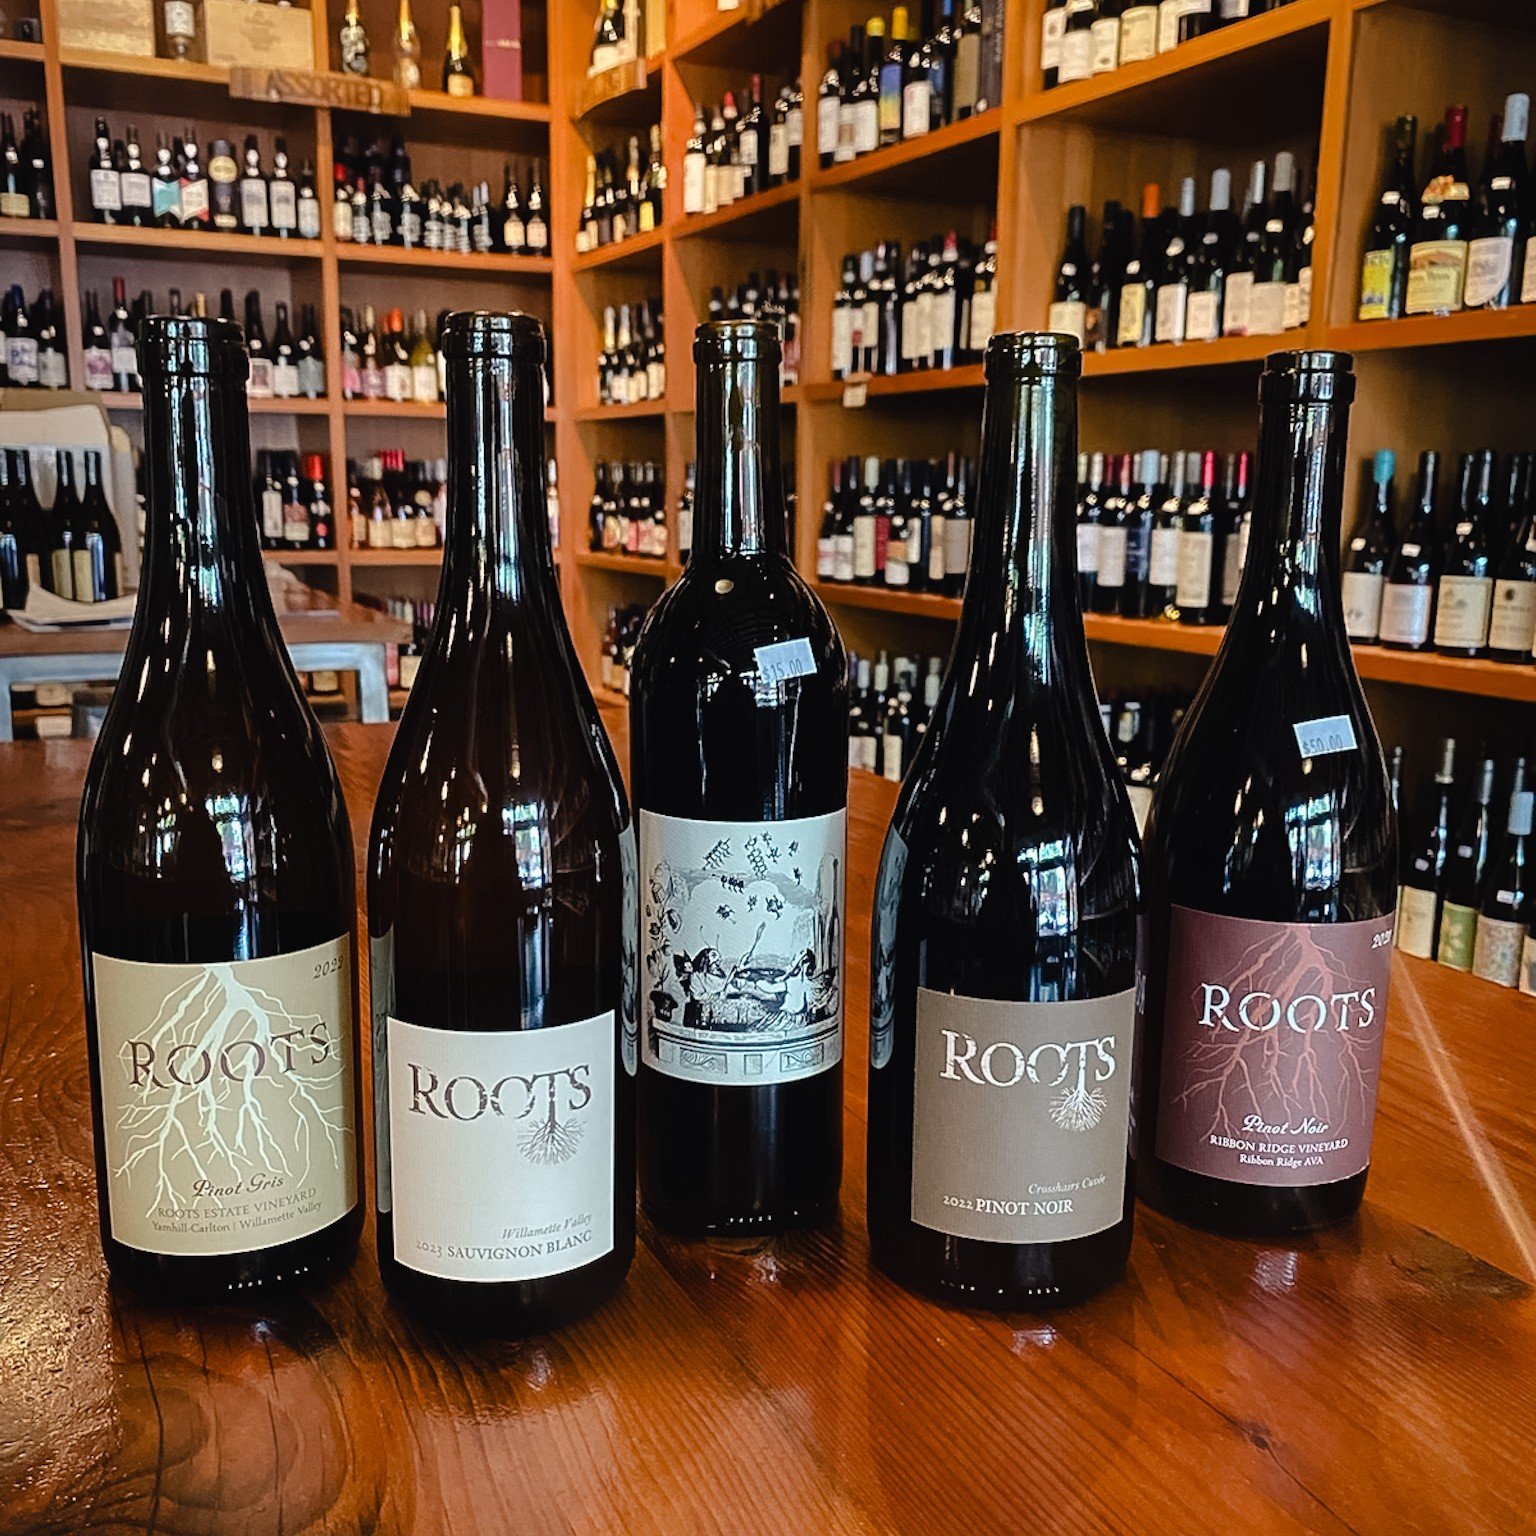 It's our first First Friday Night tasting in celebration of Oregon Wine Month tonight, and we are kicking it off with Roots Wine Company!

@rootswinecompany, nestled in Yamhill County, Oregon, was established in 2002 by the passionate duo Chris Berg 